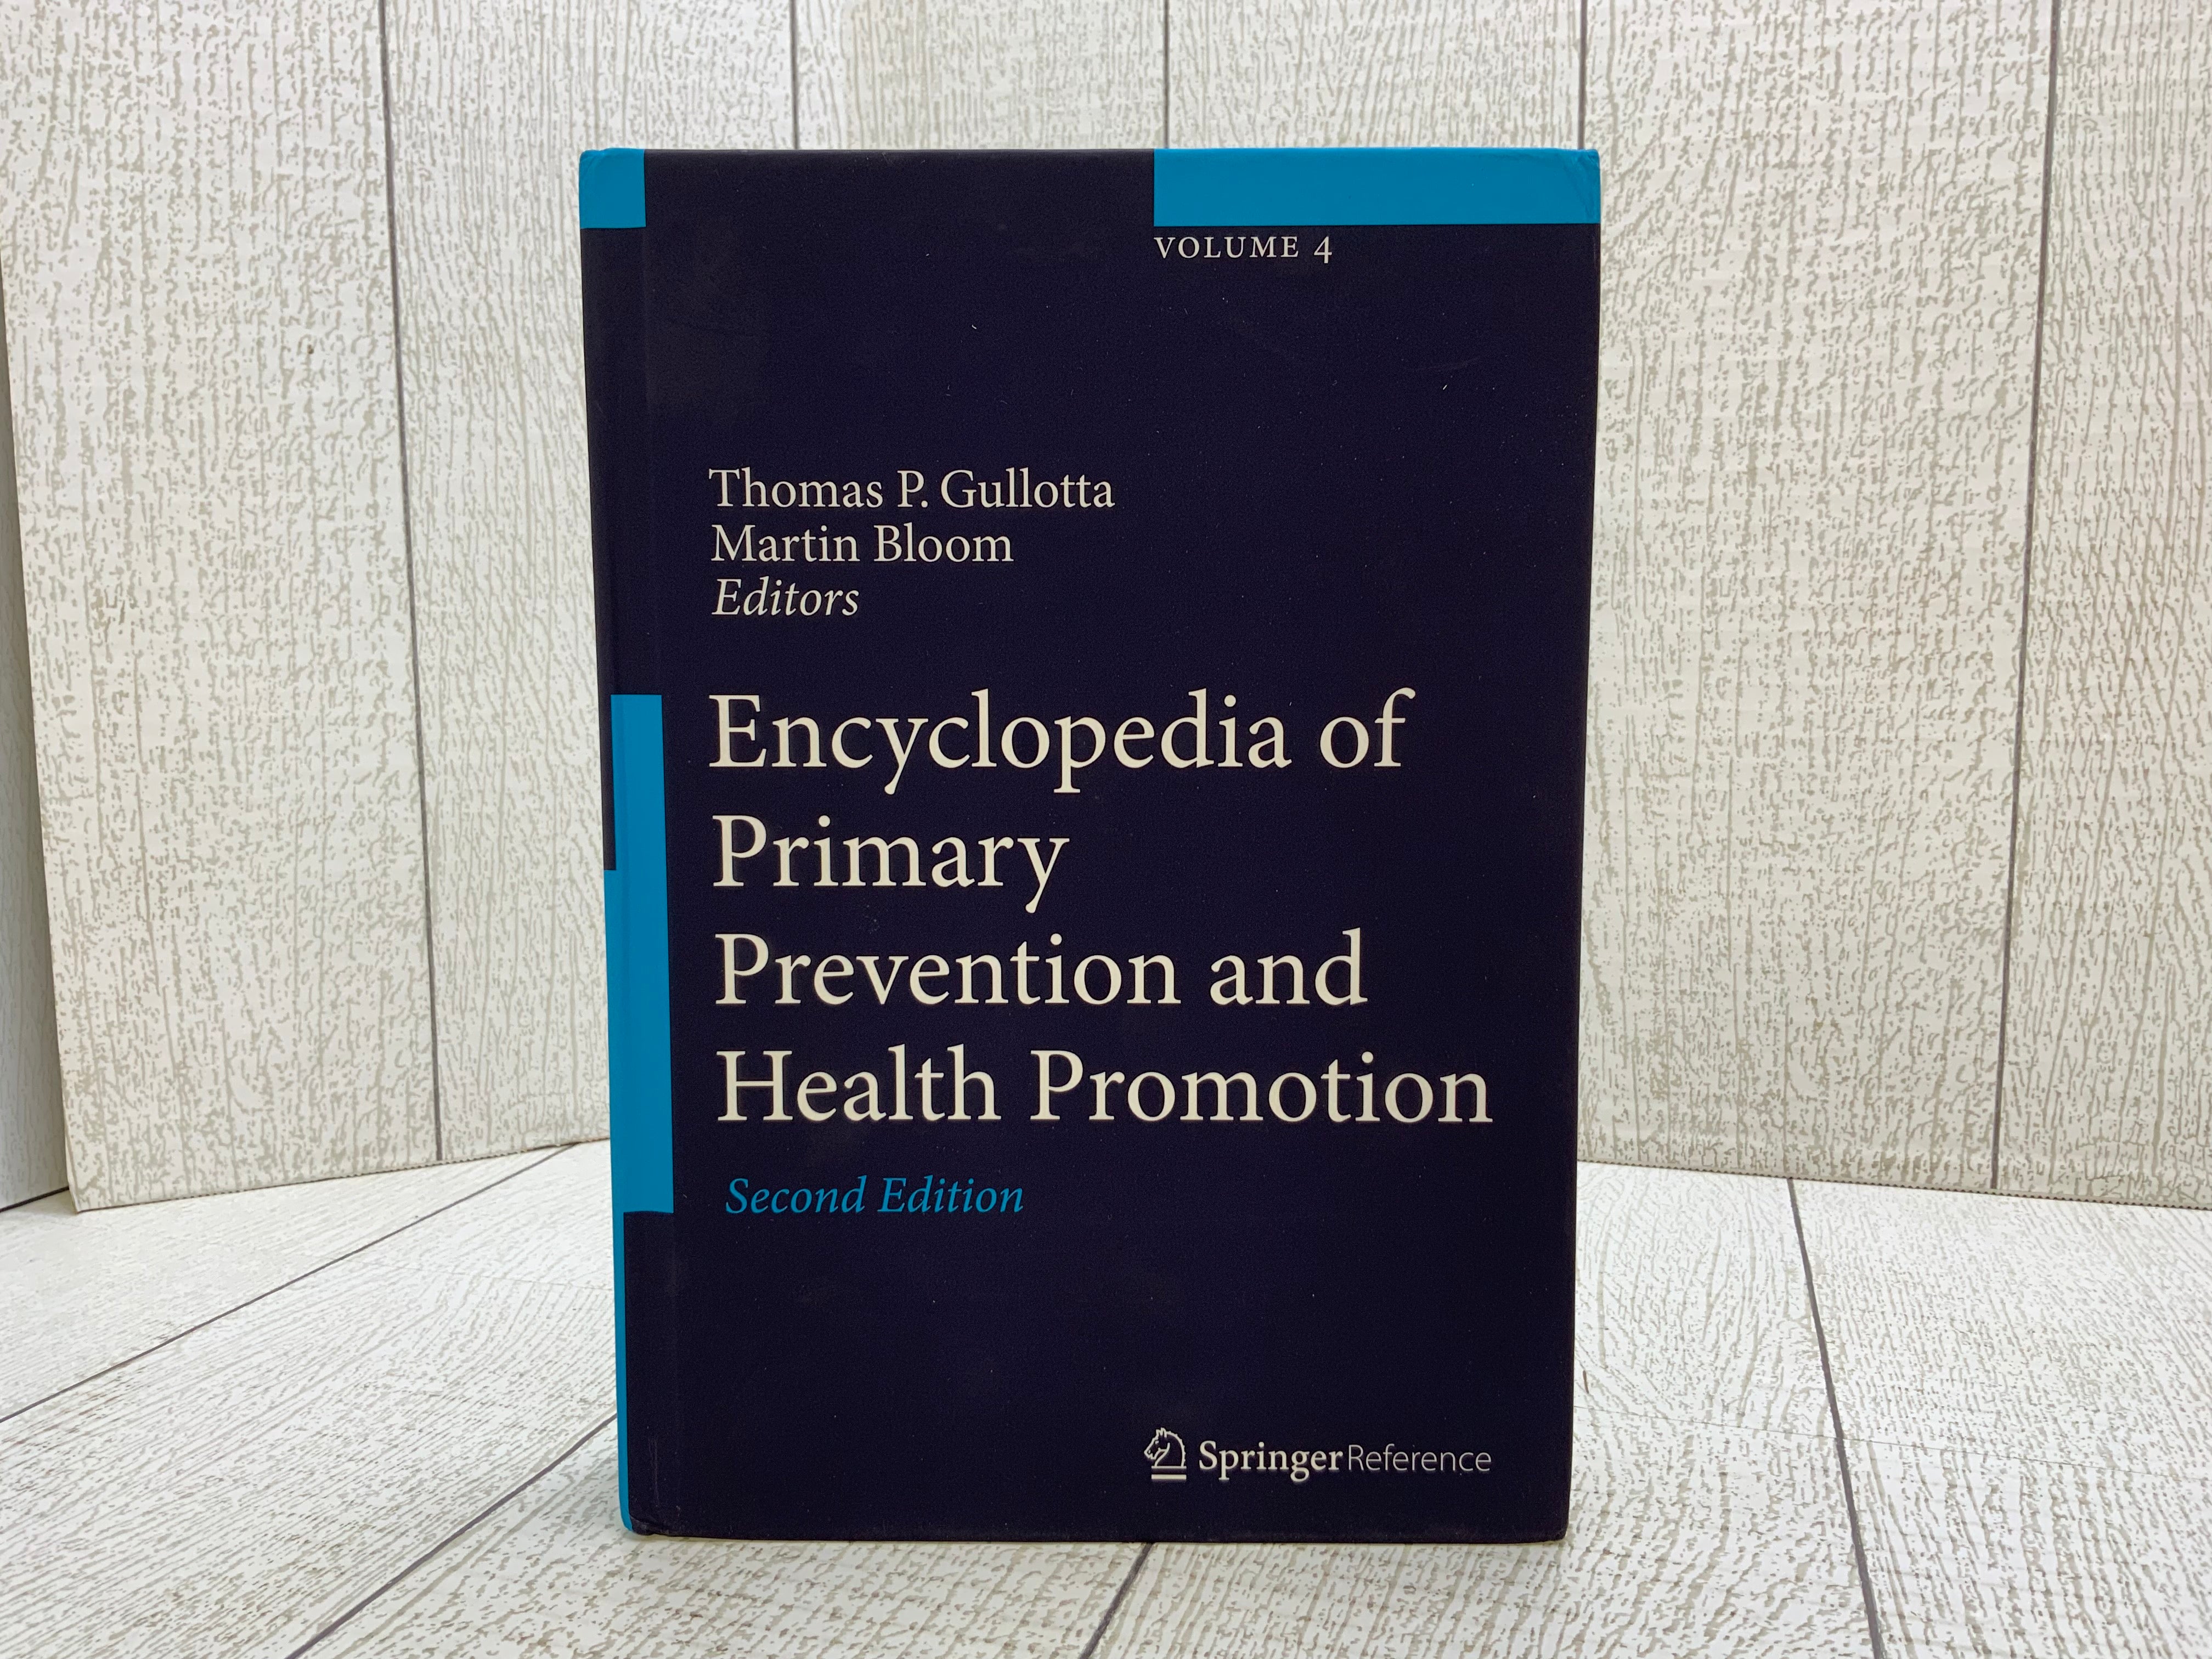 Encyclopedia of Primary Prevention and Health Promotion (VOLUME 4 ONLY) (7952209182958)